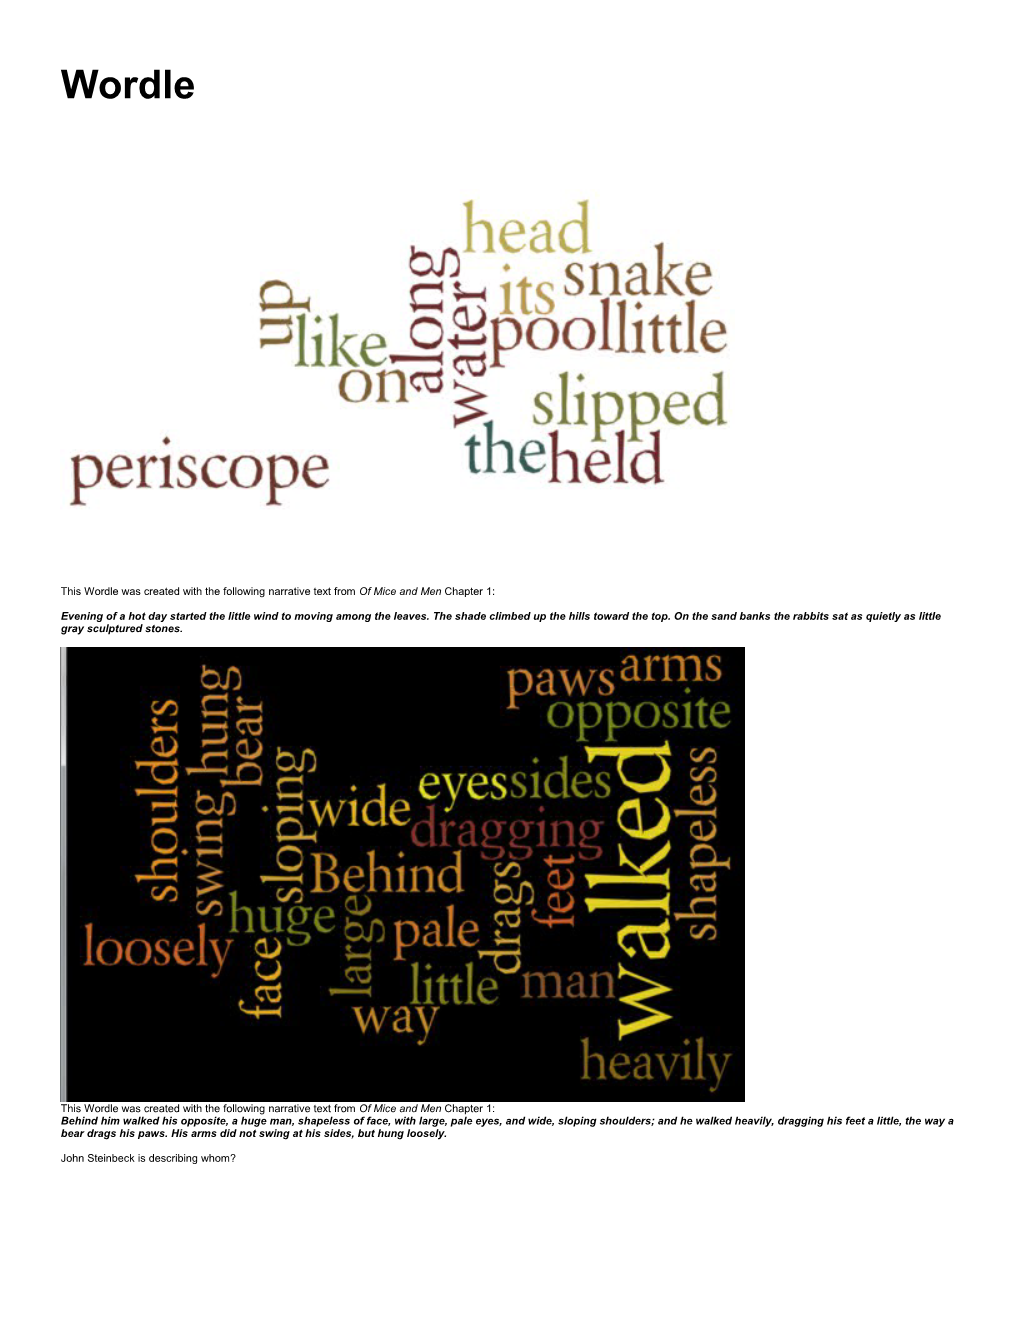 Ideas for Other Wordles?